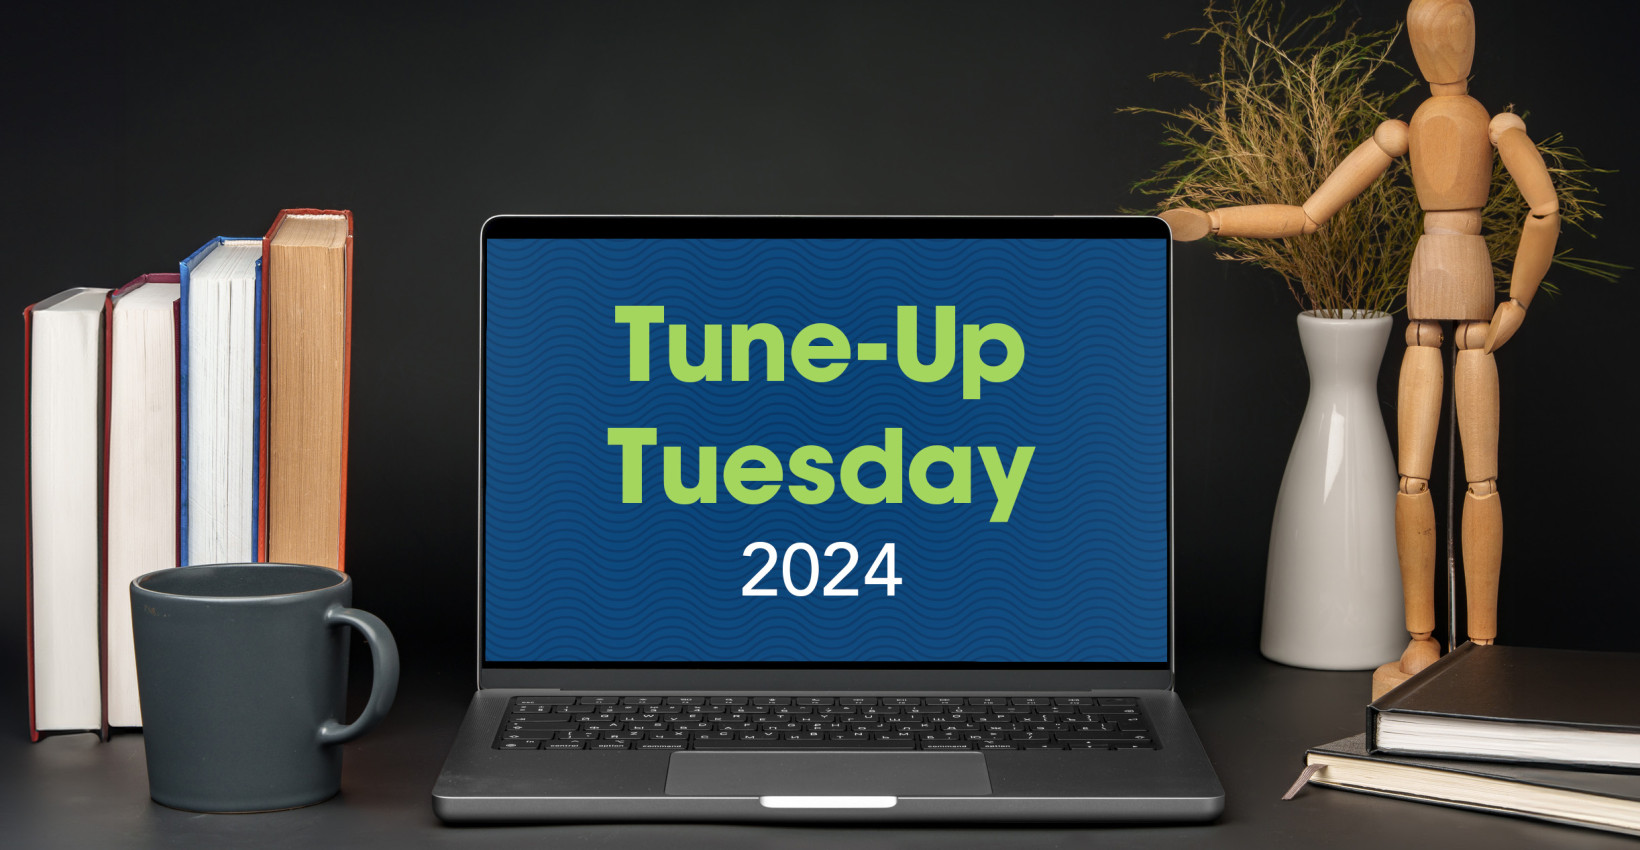 Laptop with Tuneup Tuesday image on it